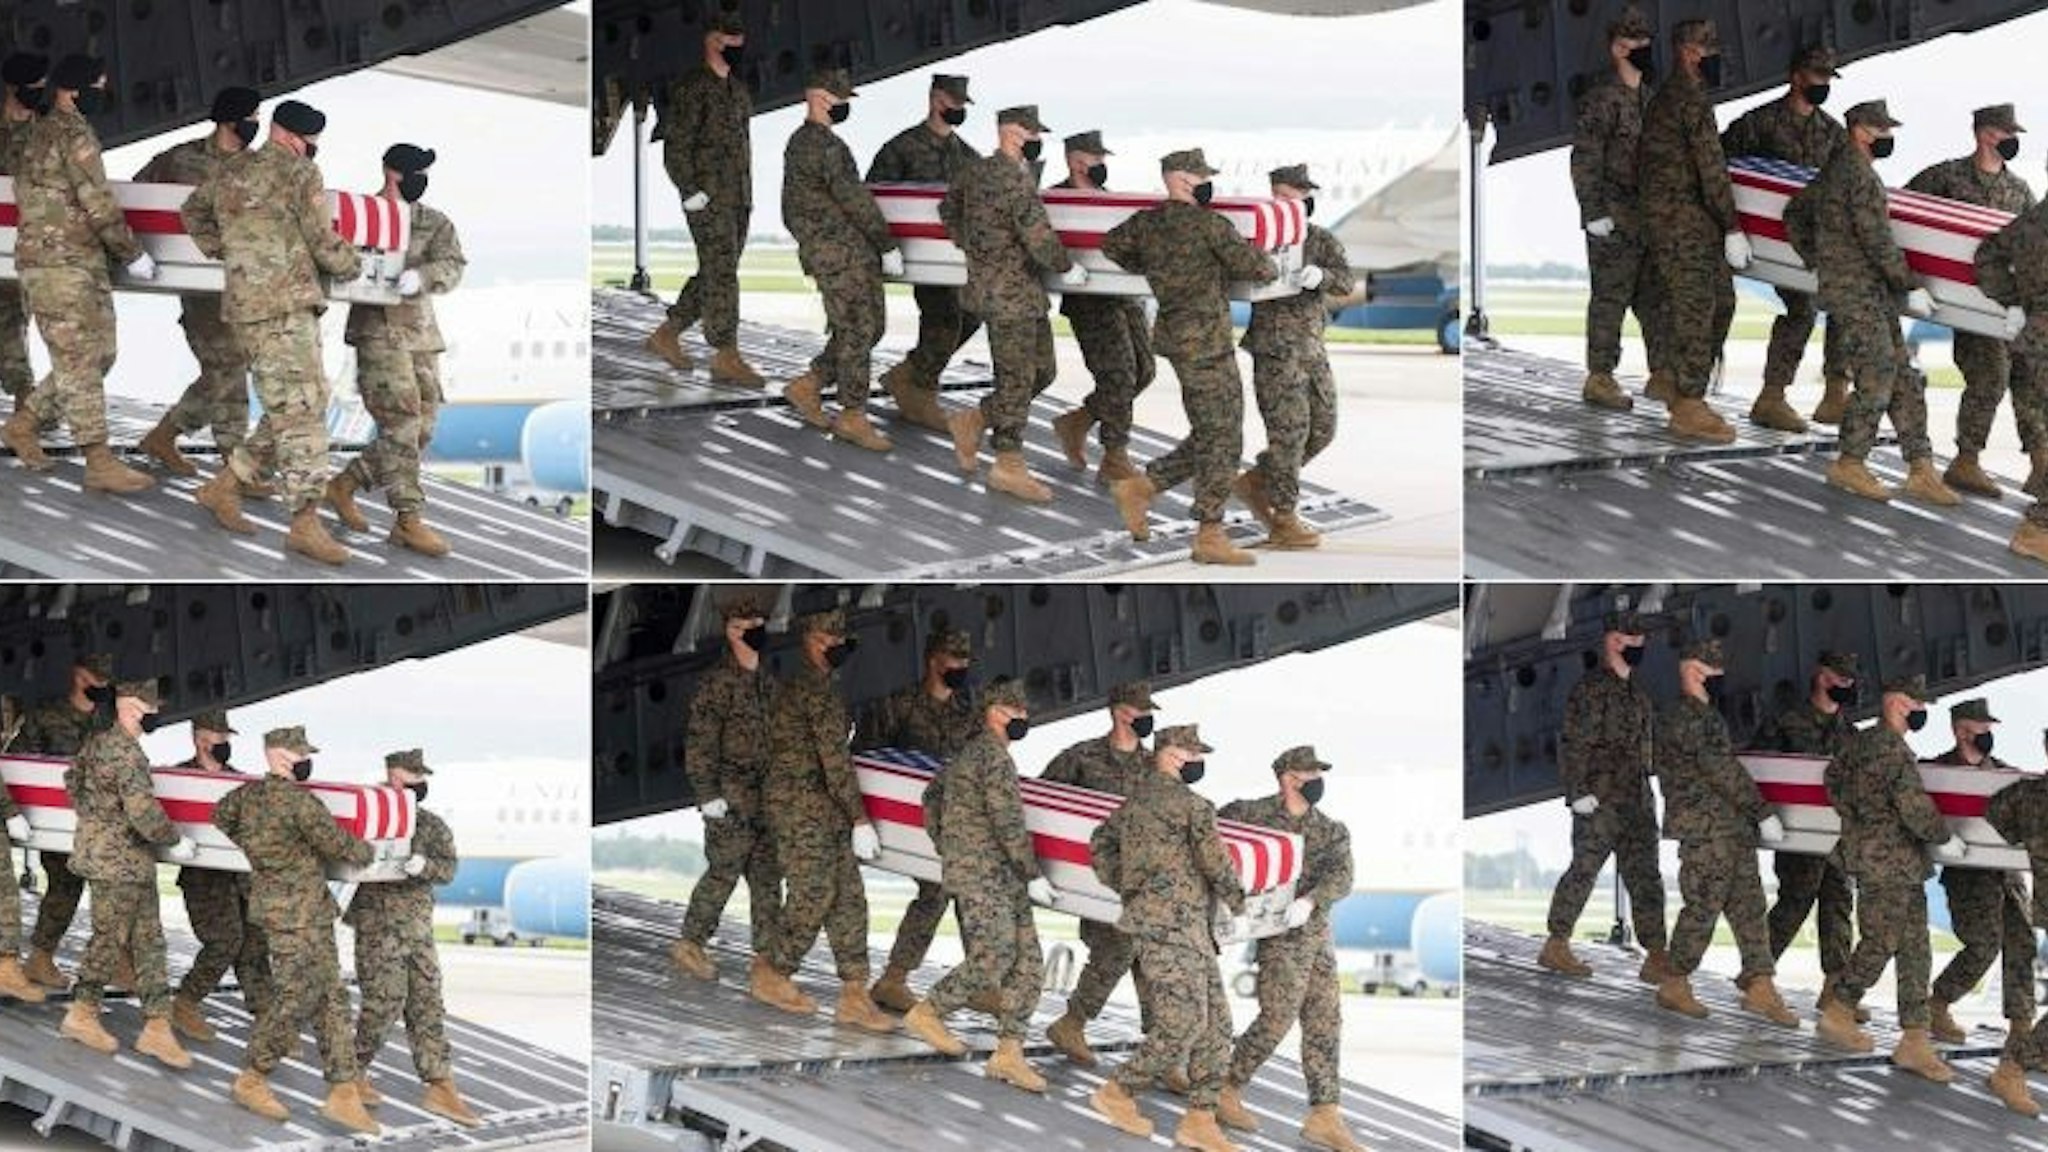 (COMBO) Military transfer teams carry one of 11 flag-draped transfer cases with the remains of a member of the military killed last week in Afghanistan off a military aircraft as US President Joe Biden attends the dignified transfer at Dover Air Force Base in Dover, Delaware, August, 29, 2021. - (From L-R, top to bottom row) The 11 service members include Army Staff Sgt. Ryan C. Knauss, 23, of Corryton, Tennessee; Marine Corps Staff Sgt. Darin T. Hoover, 31, of Salt Lake City, Utah; Marine Corps Sgt. Johanny Rosariopichardo, 25, of Lawrence, Massachusetts; Marine Corps Sgt. Nicole L. Gee, 23, of Sacramento, California; Marine Corps Cpl. Daegan W. Page, 23, of Omaha, Nebraska; Marine Corps Cpl. Humberto A. Sanchez, 22, of Logansport, Indiana; Marine Corps Lance Cpl. David L. Espinoza, 20, of Rio Bravo, Texas; Marine Corps Lance Cpl. Jared M. Schmitz, 20, of St. Charles, Missouri; Marine Corps Lance Cpl. Dylan R. Merola, 20, of Rancho Cucamonga, California; Marine Corps Lance Cpl. Kareem M. Nikoui, 20, of Norco, California; and Navy Hospitalman Maxton W. Soviak, 22, of Berlin Heights, Ohio. The transfer cases with the remains of two additional service members are not pictured. Dover Air Force Base in Delaware on the US East Coast about two hours from Washington is synonymous with the painful return of service members who have fallen in combat. (Photo by SAUL LOEB / AFP) (Photo by